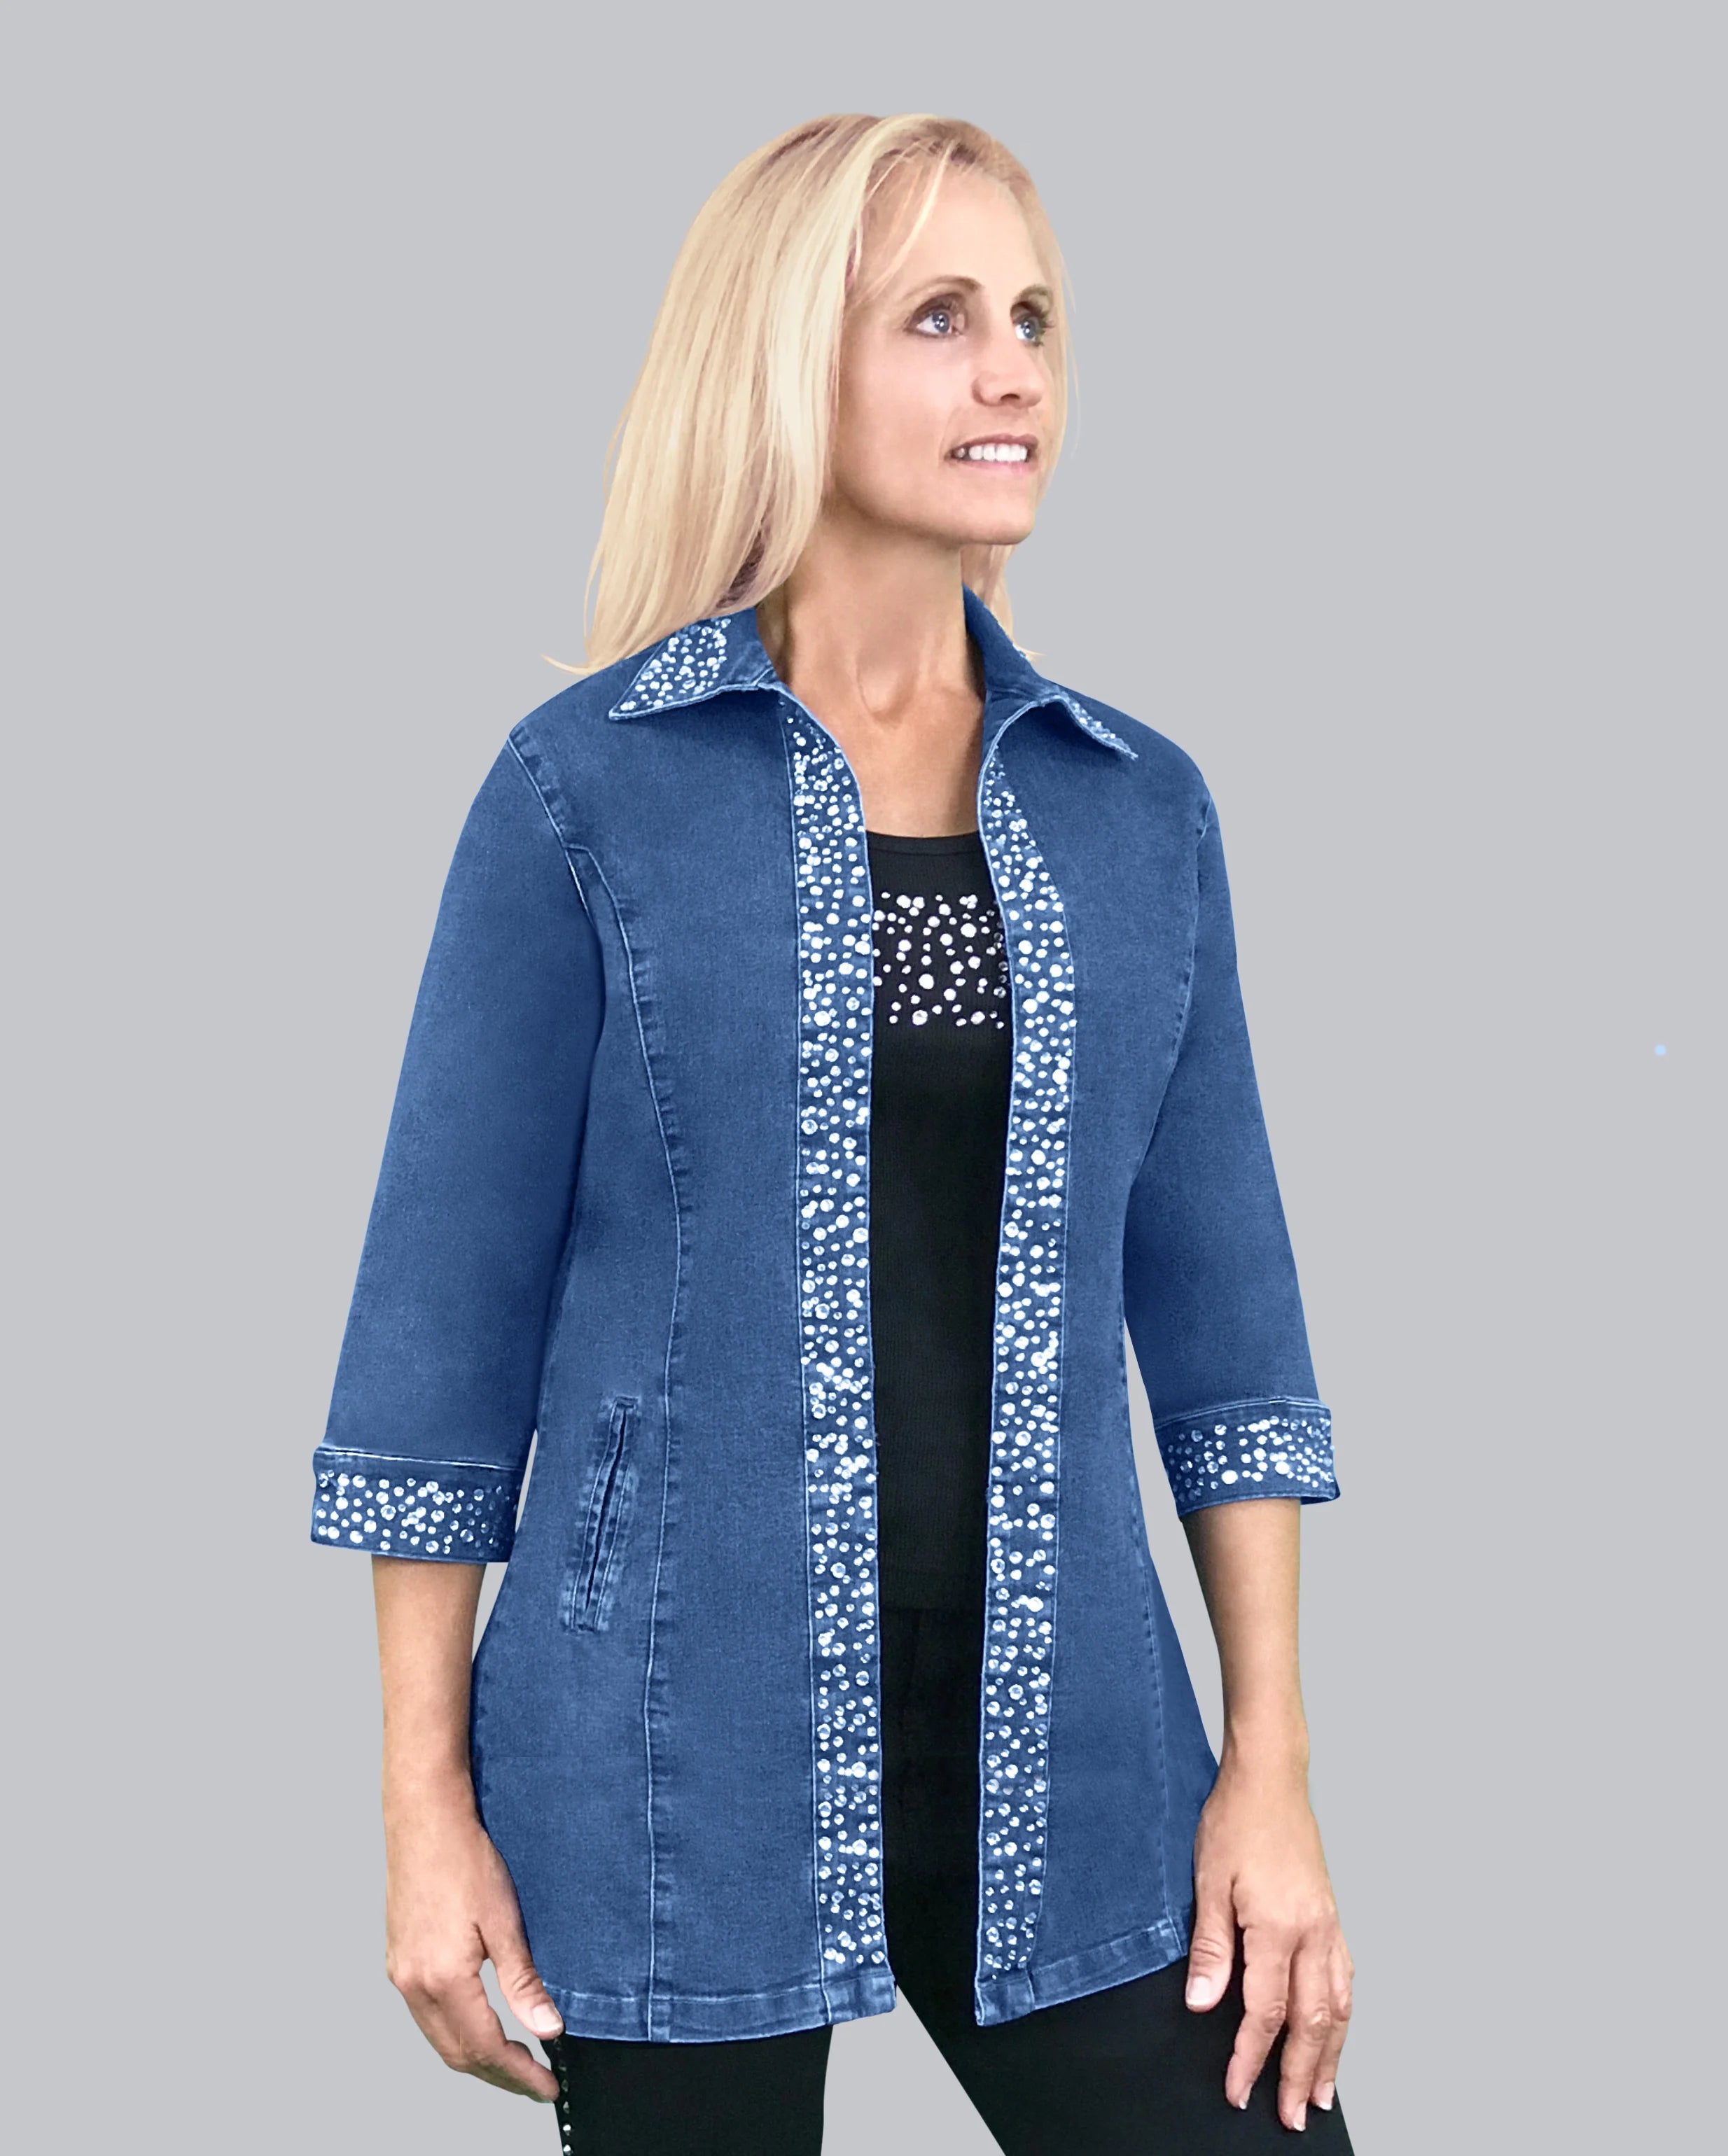 Classic Denim jacket with Ice Crystals